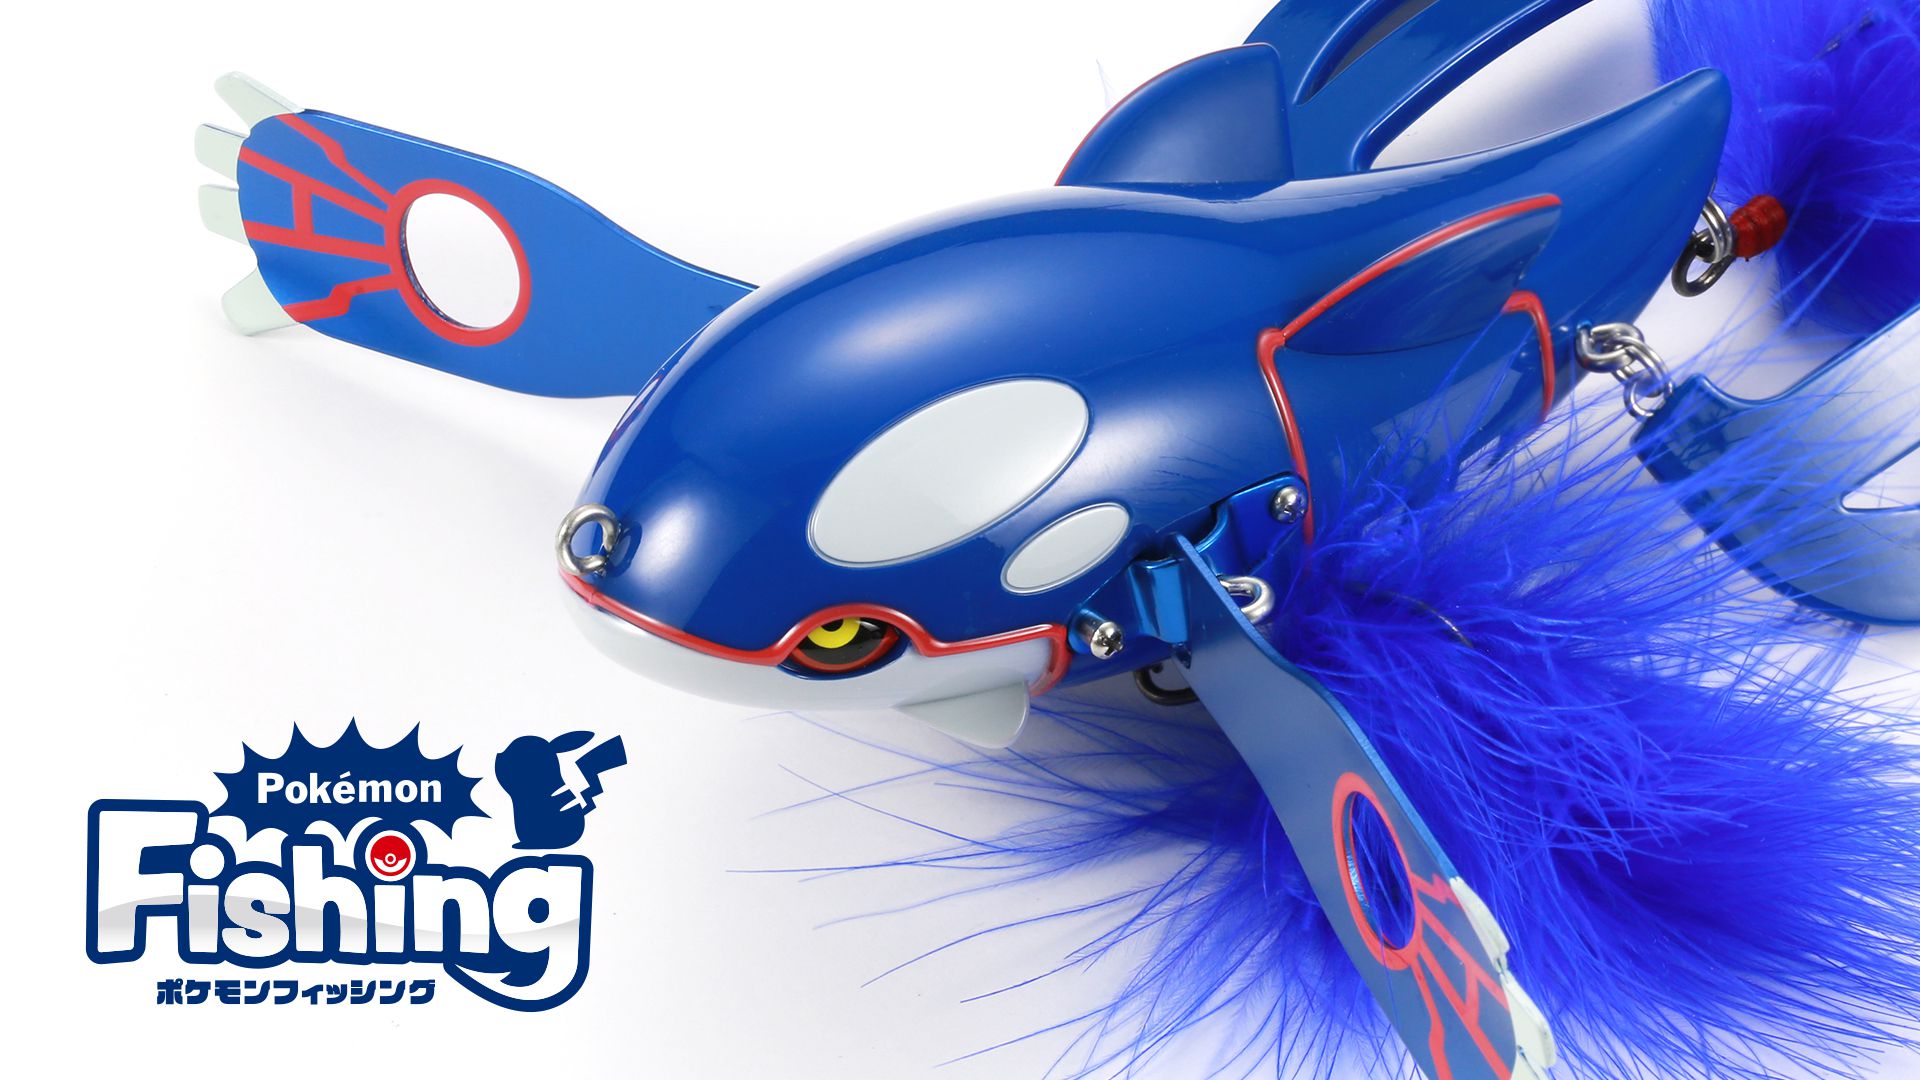 Trailers released for Pokémon Fishing Lures – Nintendo Wire